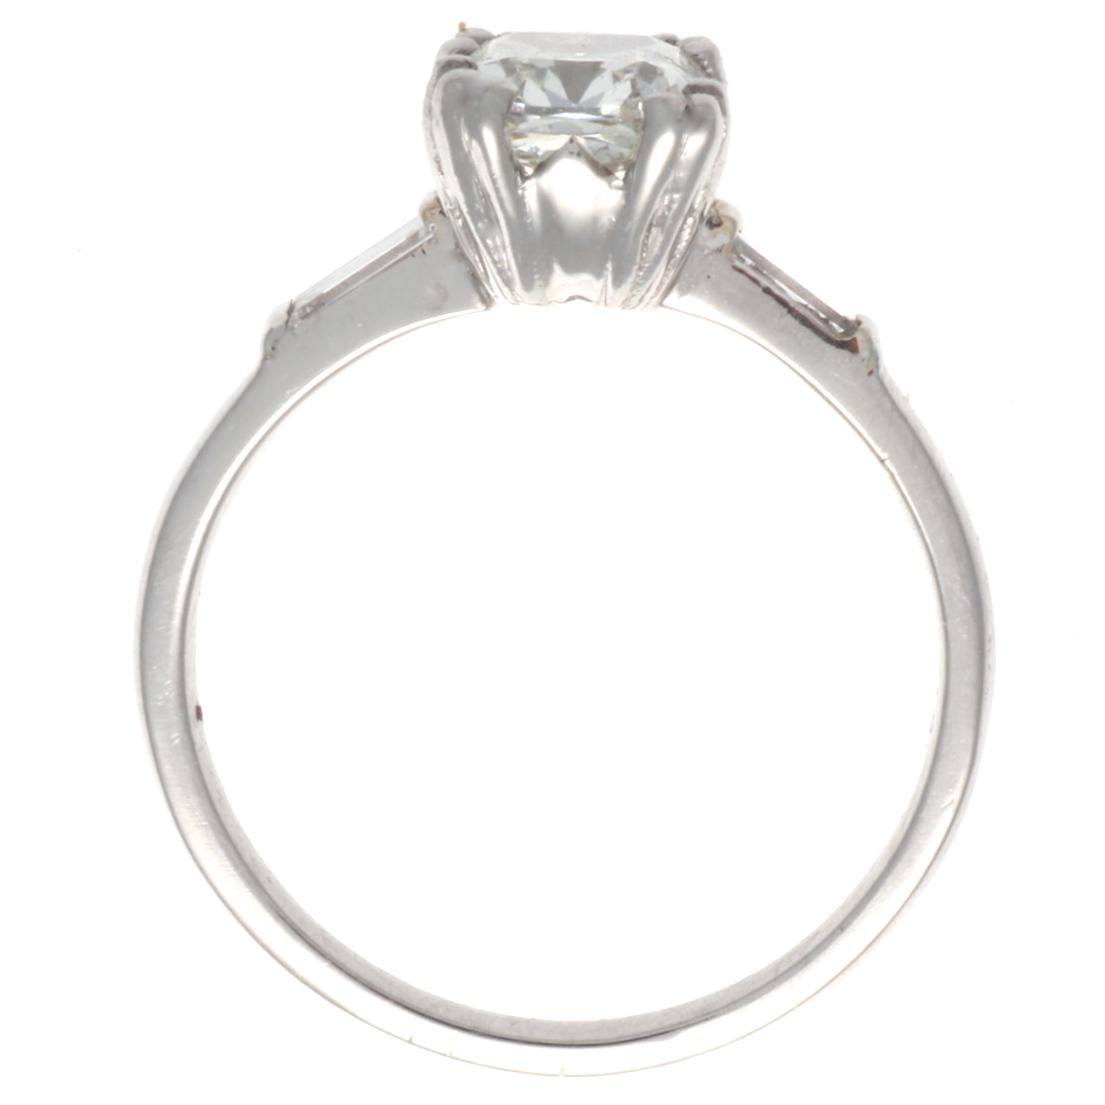 This perfectly poised Art Deco diamond engagement ring features a GIA certified 1.26 carat, K color VVS1 old mine cut diamond. Crafted in platinum, it includes 2 baguette cut diamonds that weigh approximately 0.20 carats, graded F-G color, VS-SI